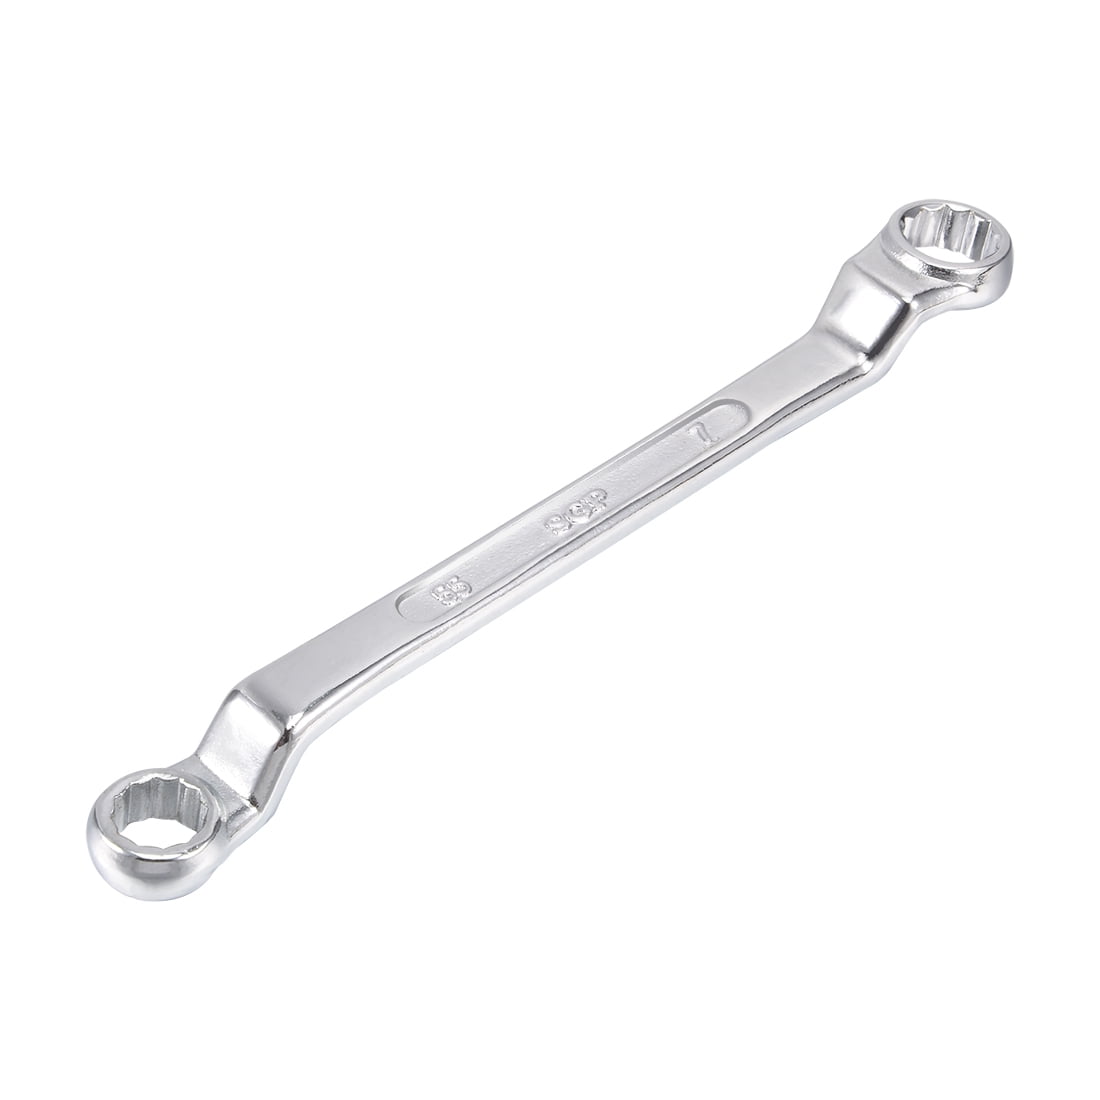 Ratcheting Ring 10mm X 13mm Offset Double Ended Ratchet Spanner Wrench